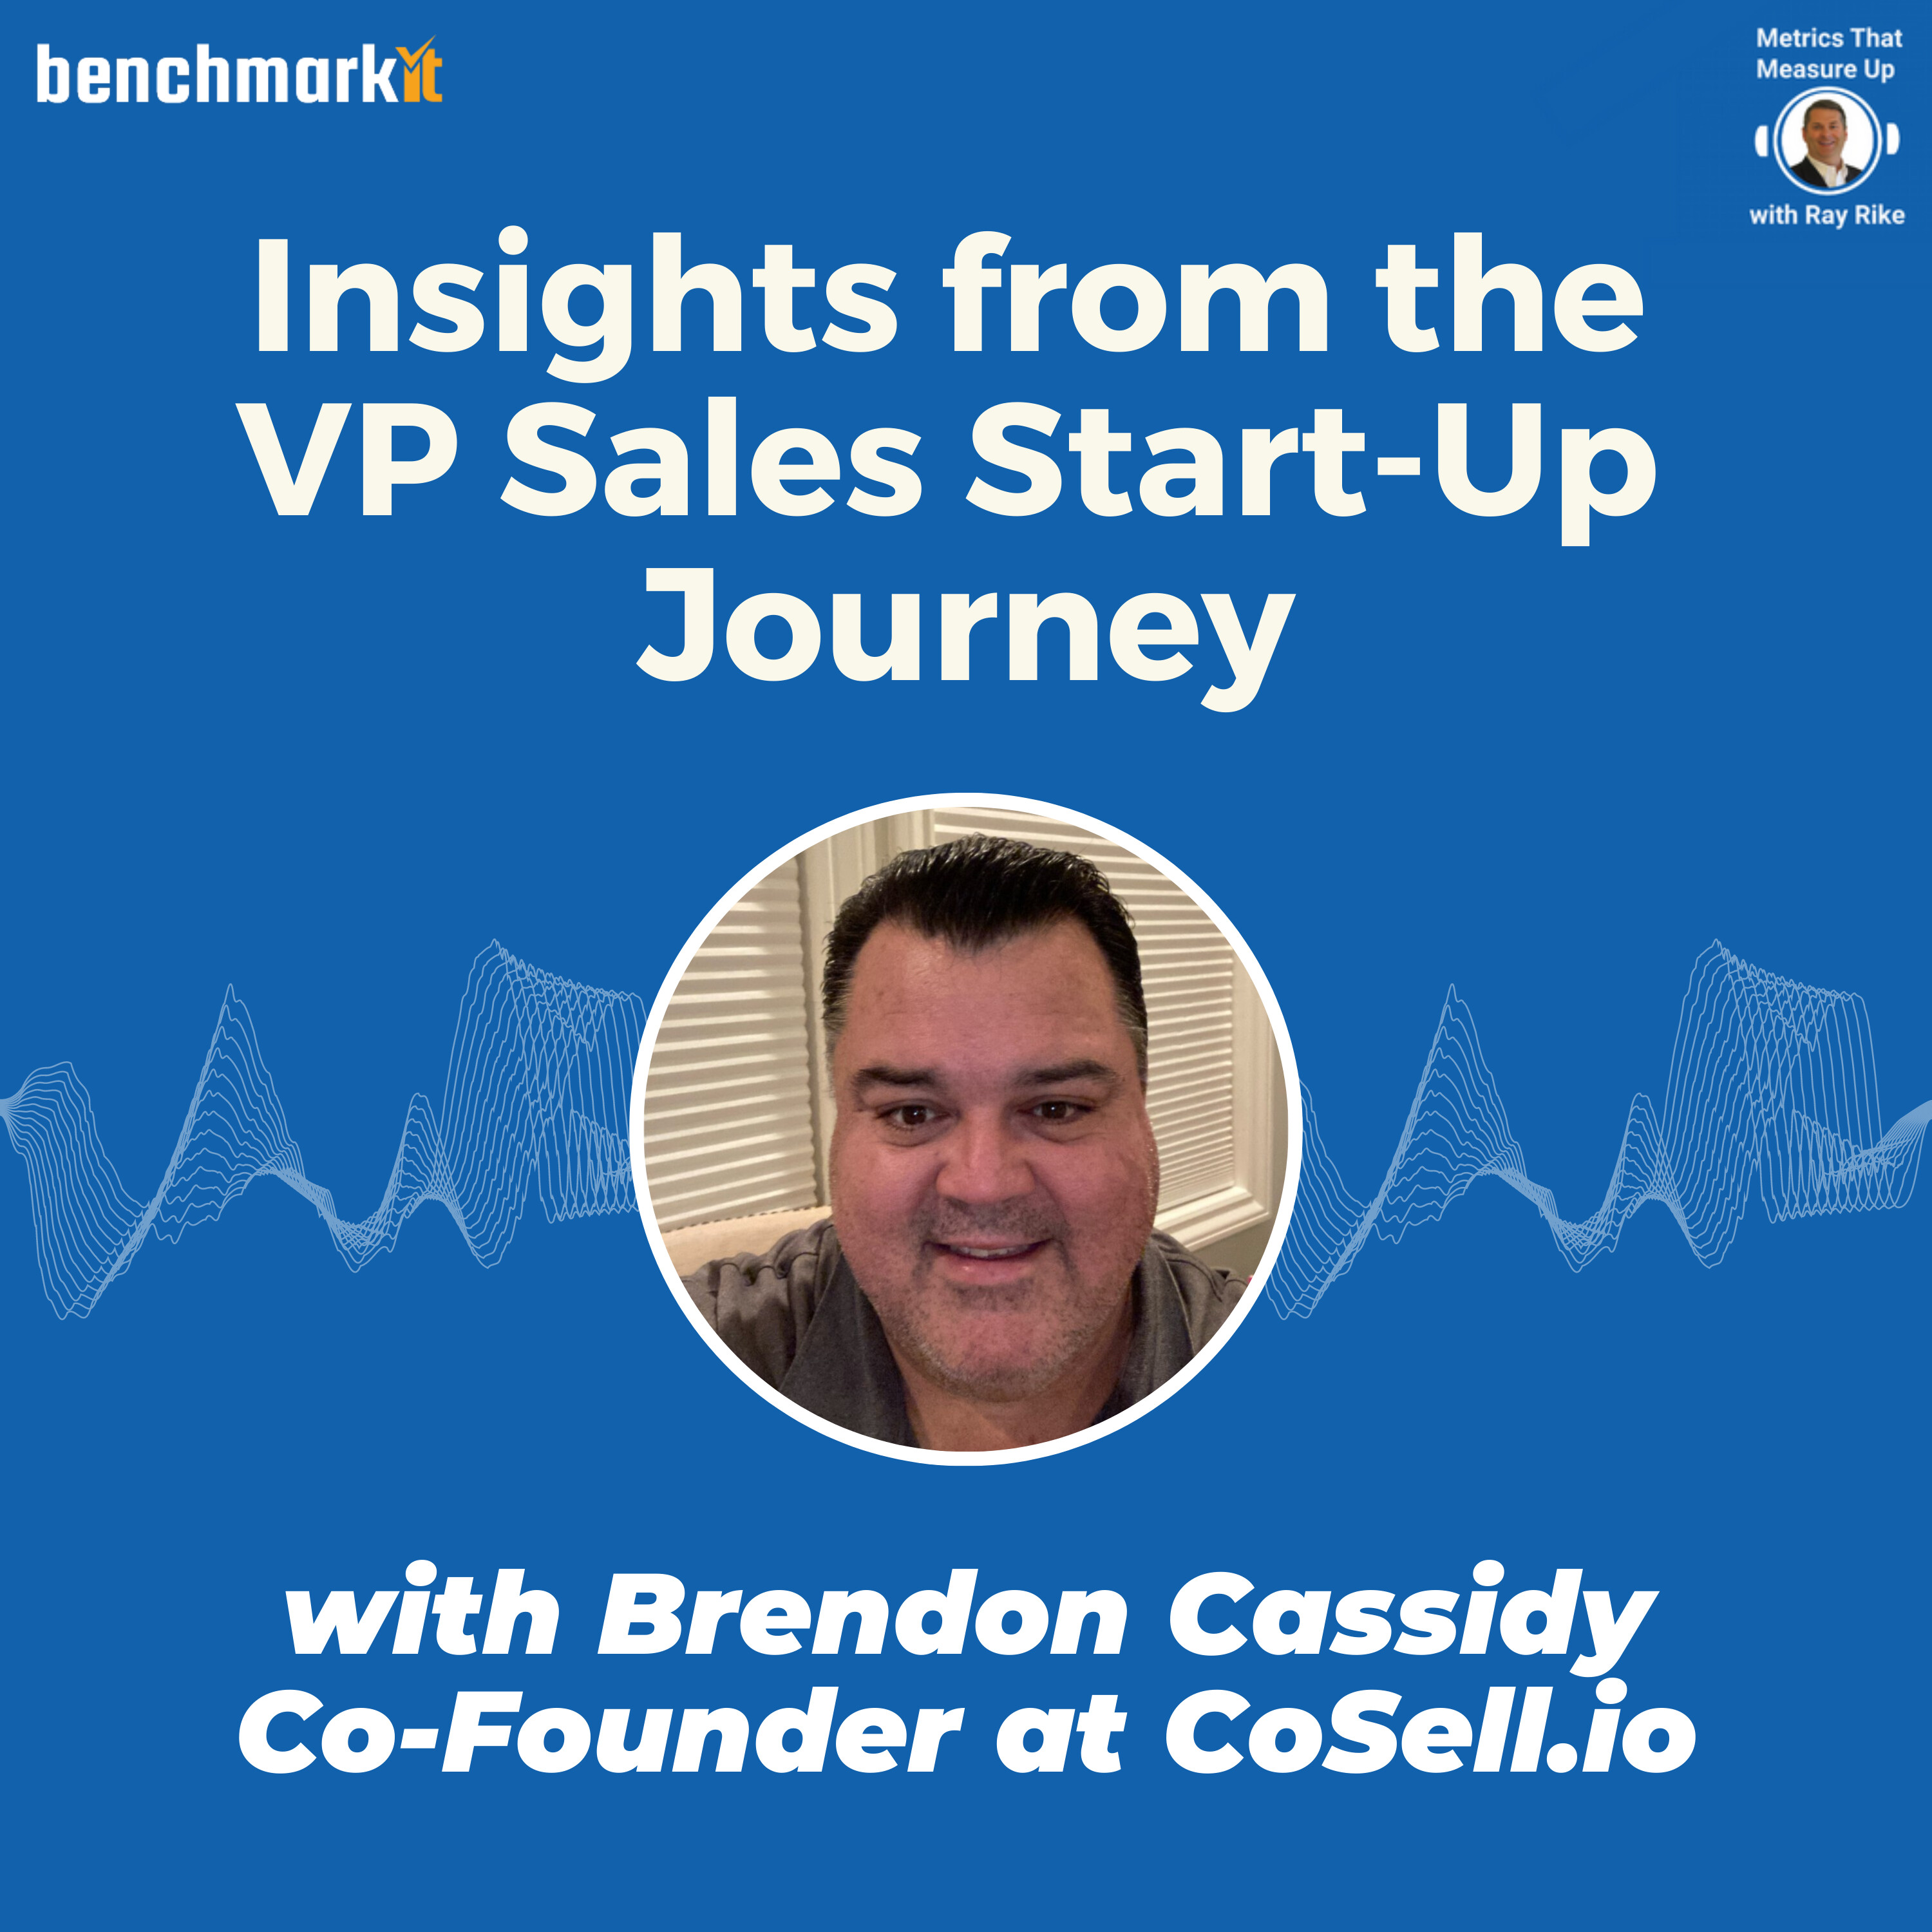 The B2B SaaS VP Sales Journey - with Brendon Cassidy, Founder and CEO CoSell